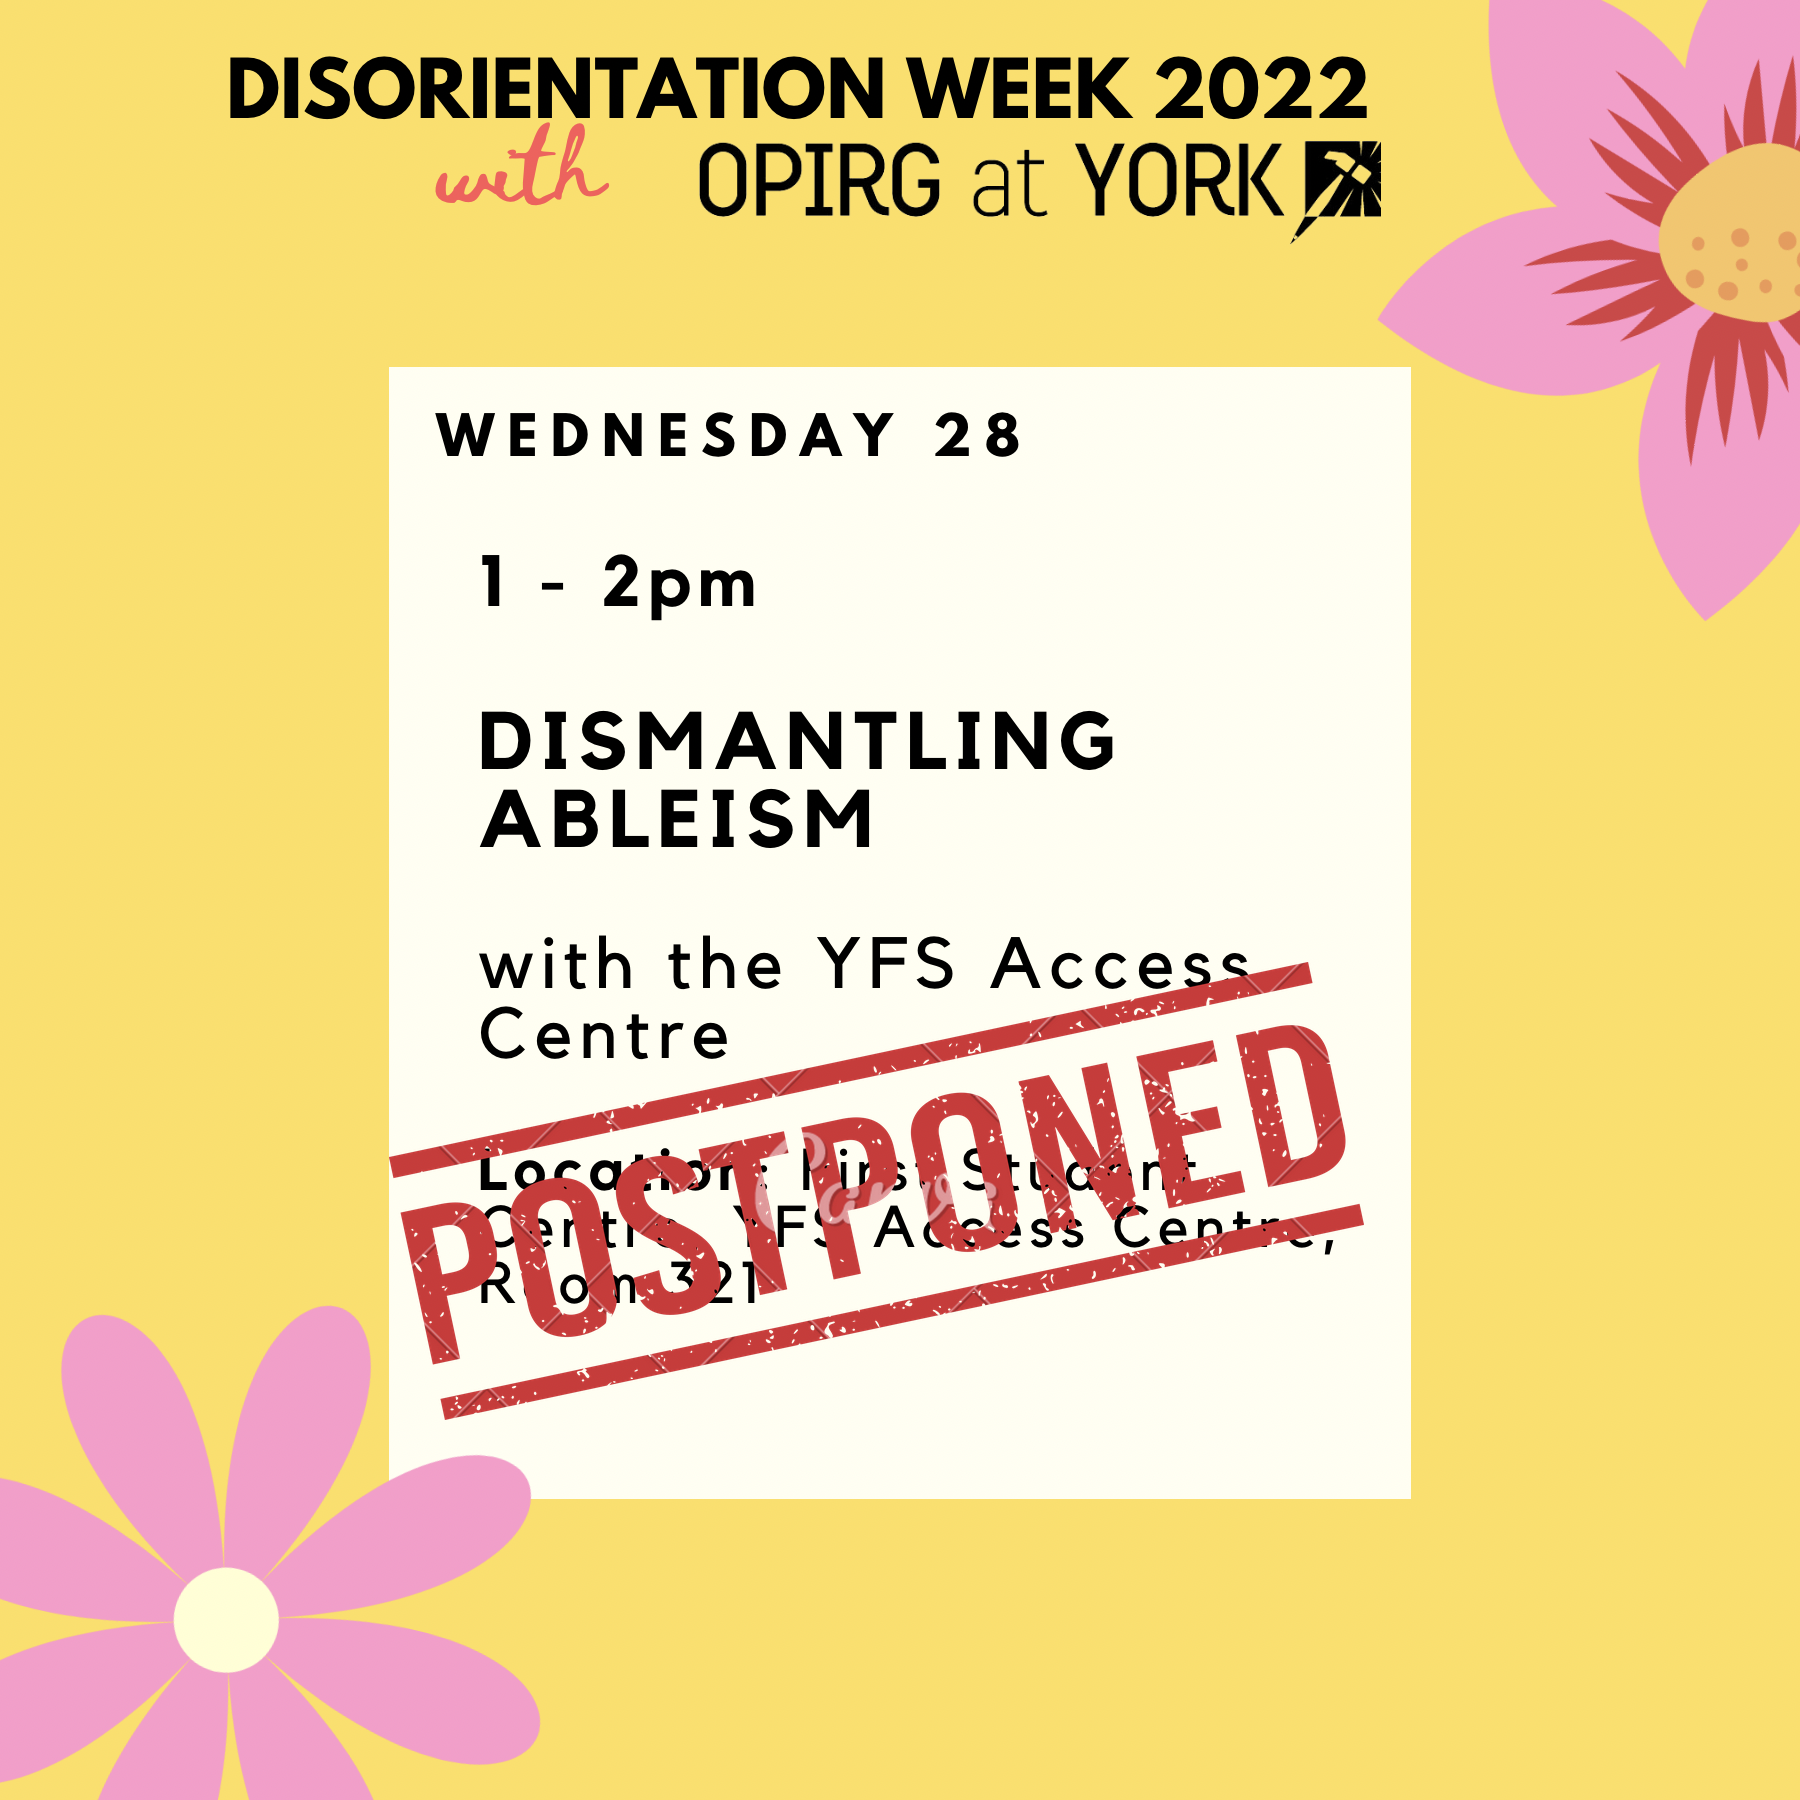 Wednesday 28, 1 - 2pm   Dismantling Ableism  with the YFS Access Centre   Location: First Student Centre, YFS Access Centre, Room 321; Postponed! Yellow background with pink flowers in the corners.